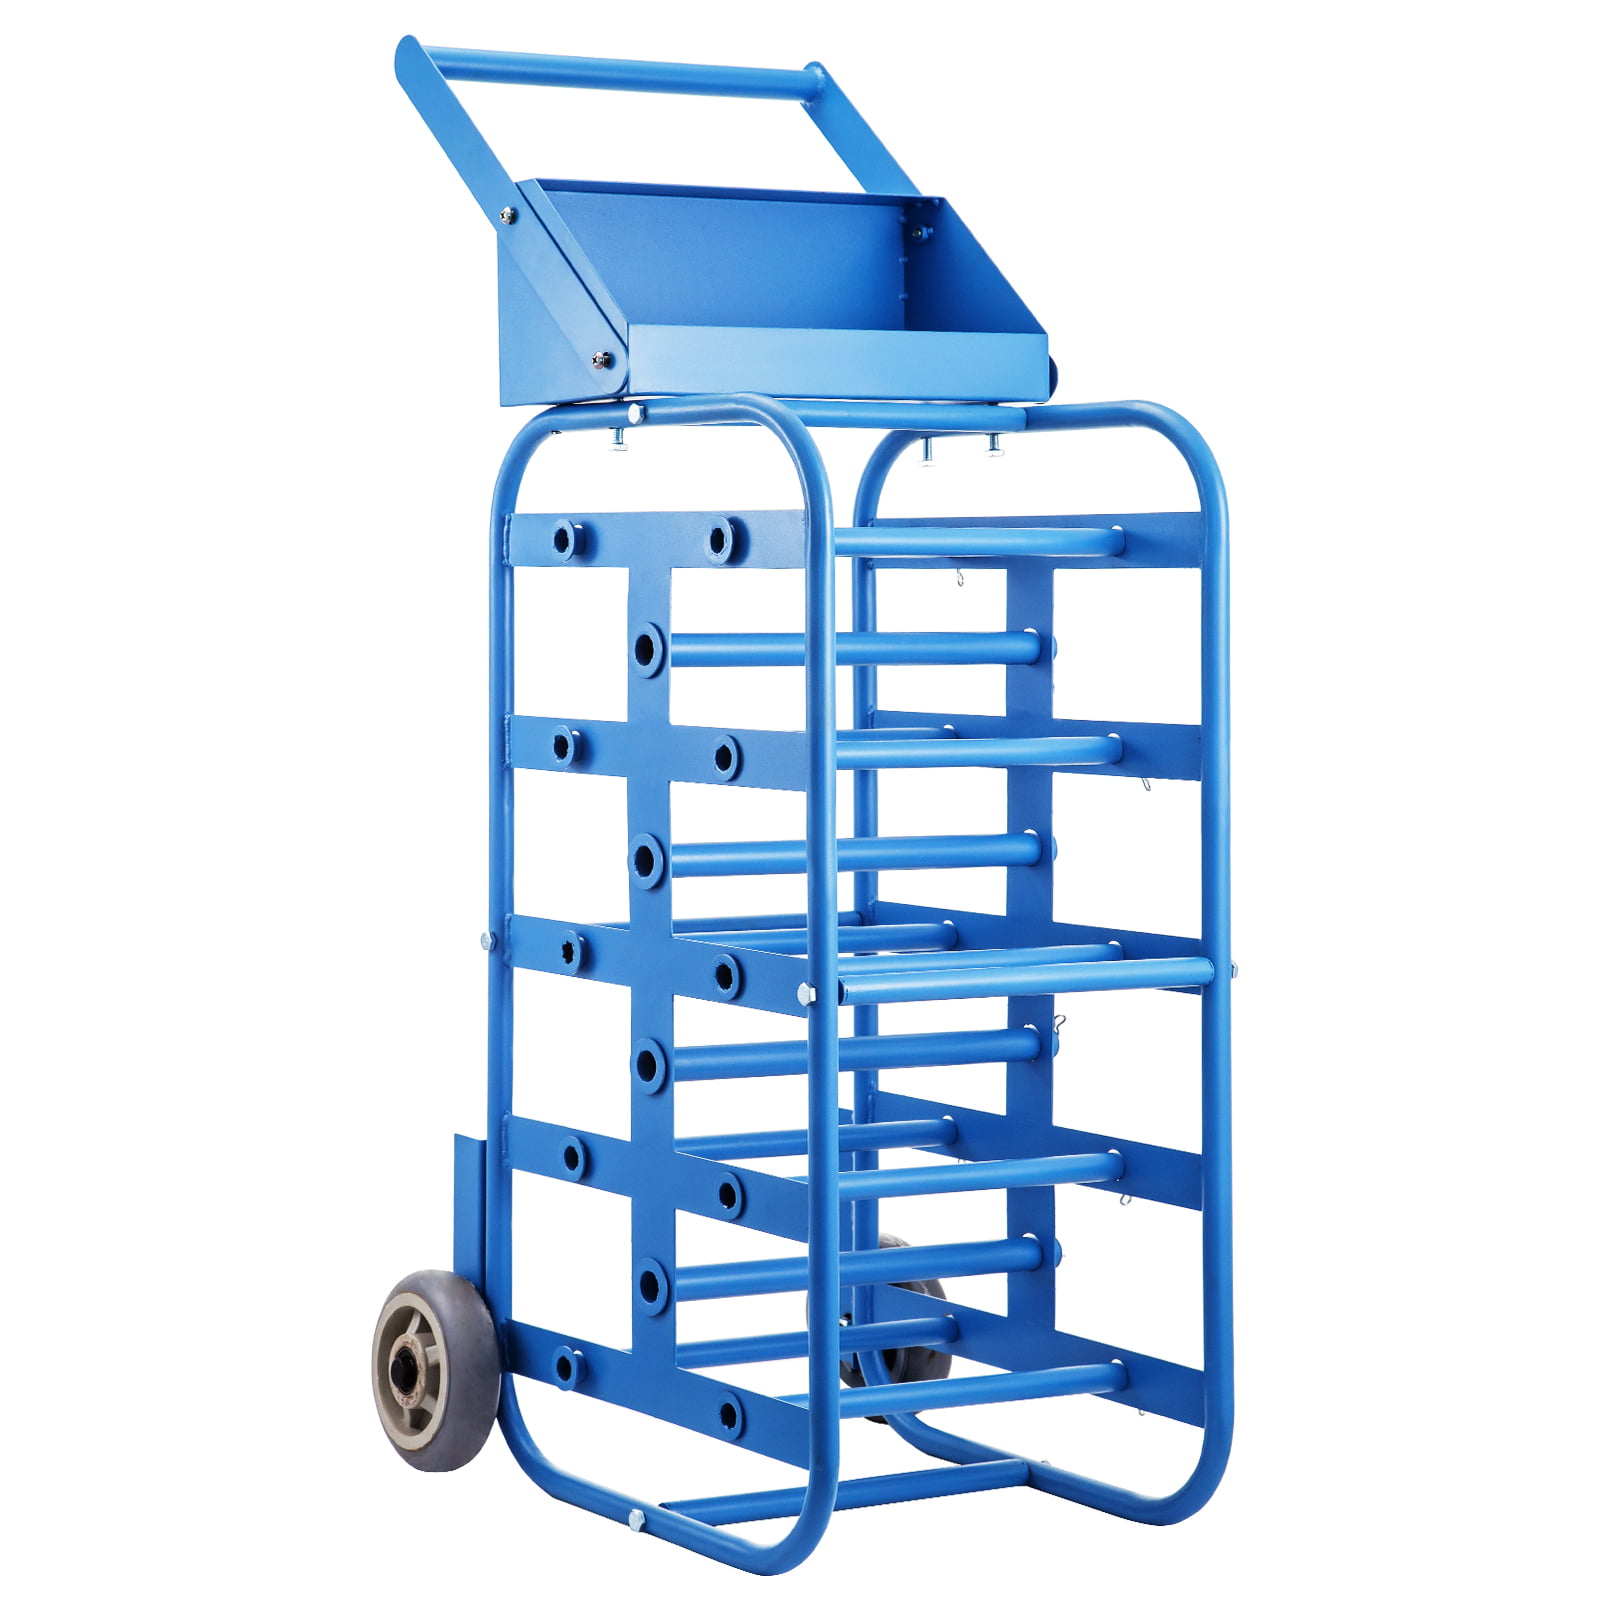 VEVOR Wire Reel Caddy 1Inch & 4/5Inch Axles Wire Spool Rack 43Inch x15Inch x17Inch Wire Caddy